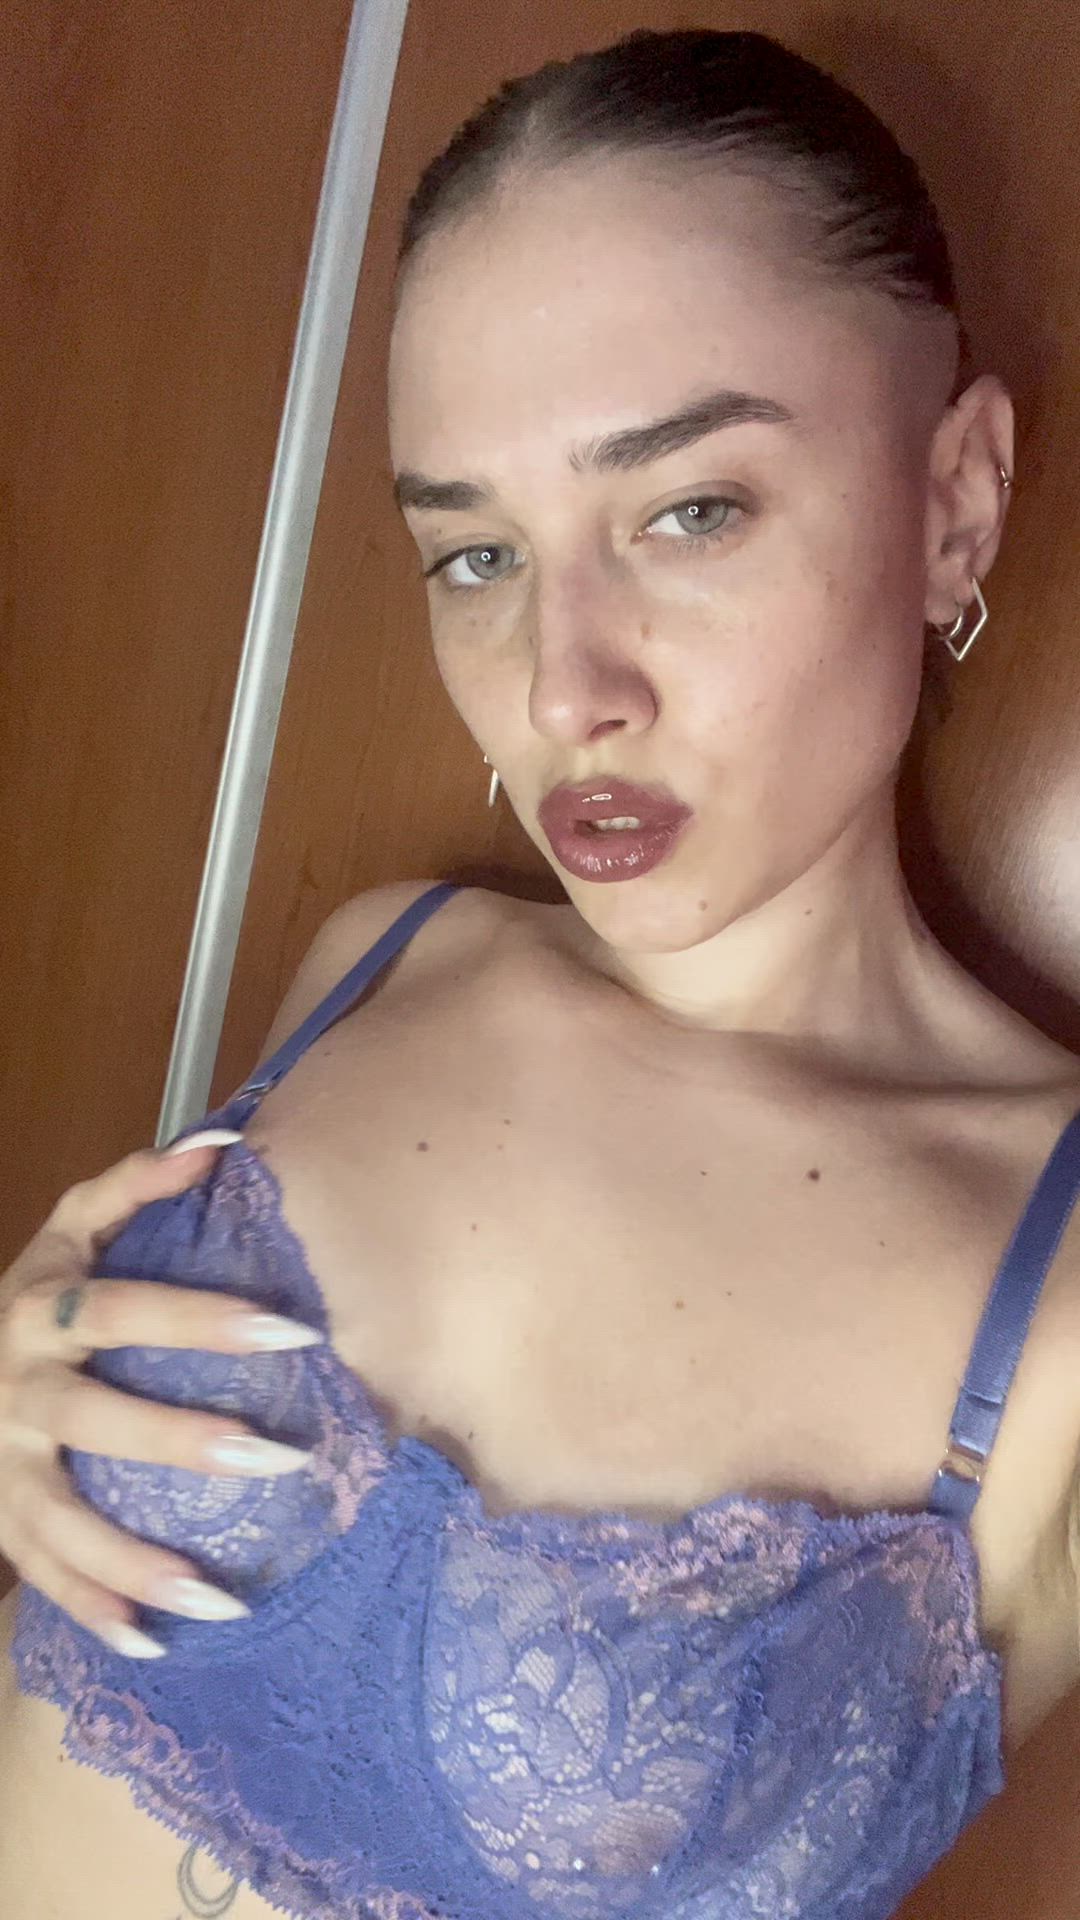 Ass porn video with onlyfans model xddarkitty <strong>@xdarkitty</strong>